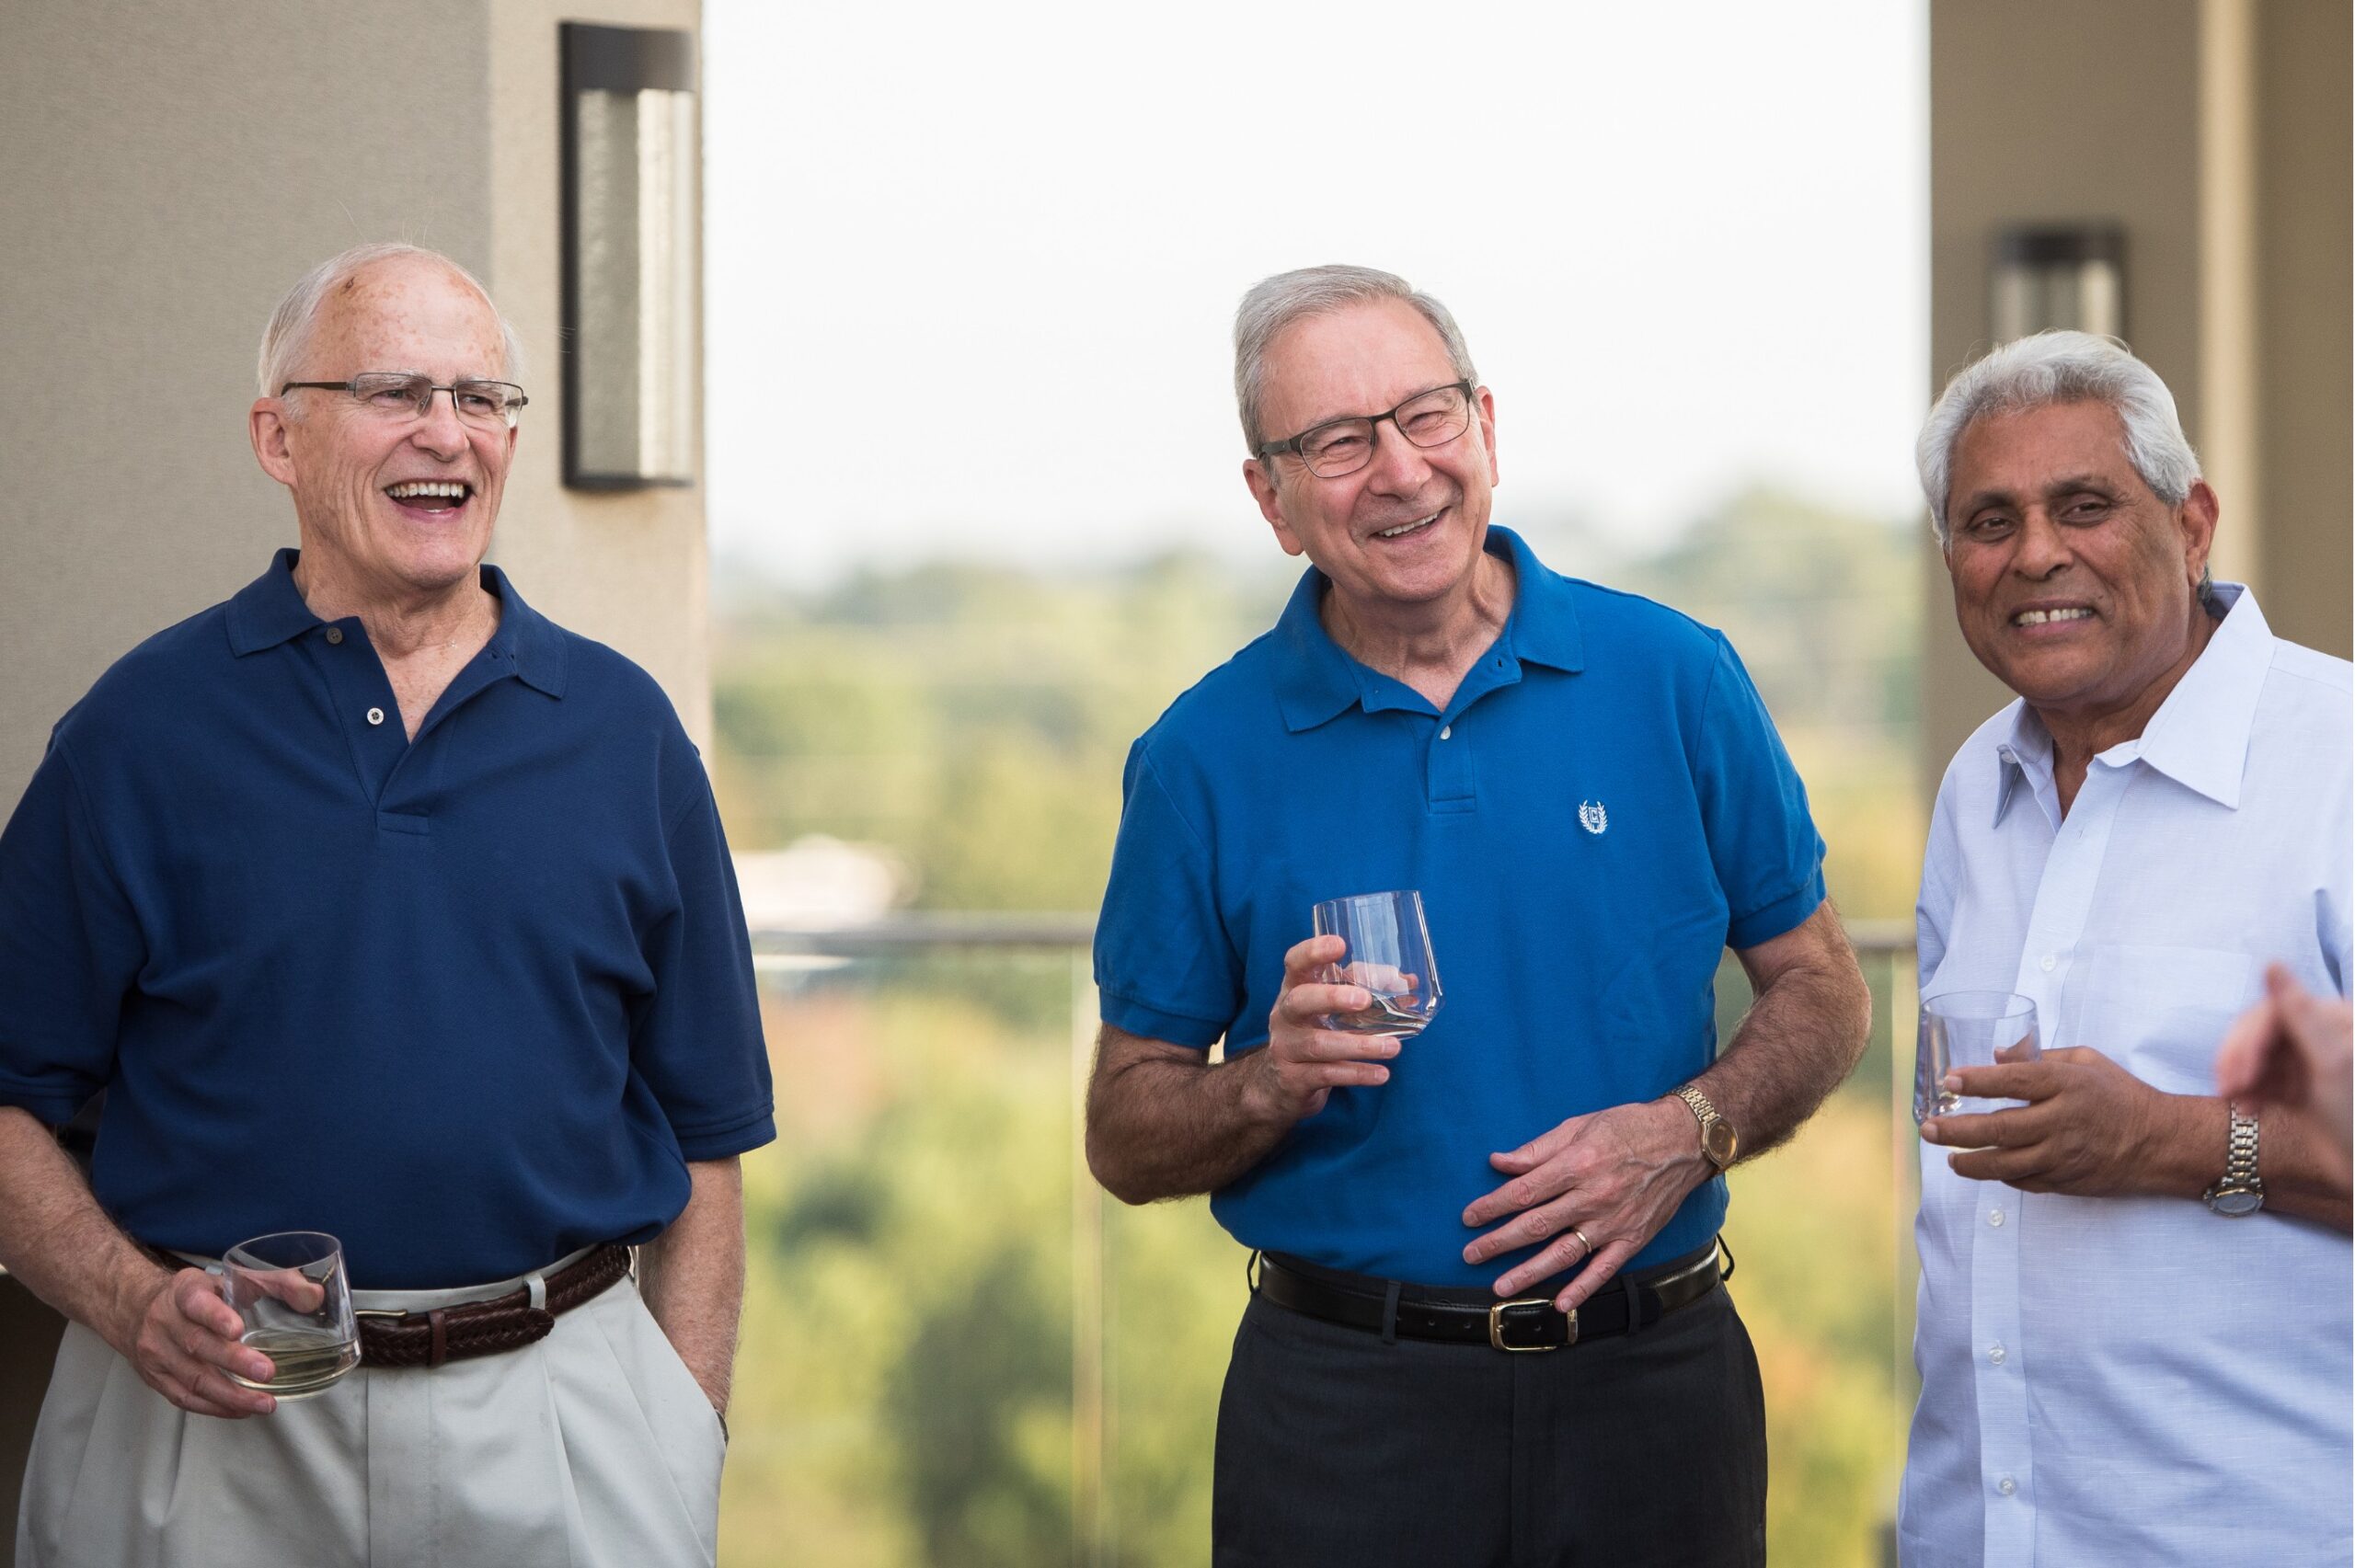 Three senior men are laughing while holding drinks on a retirement community balcony.